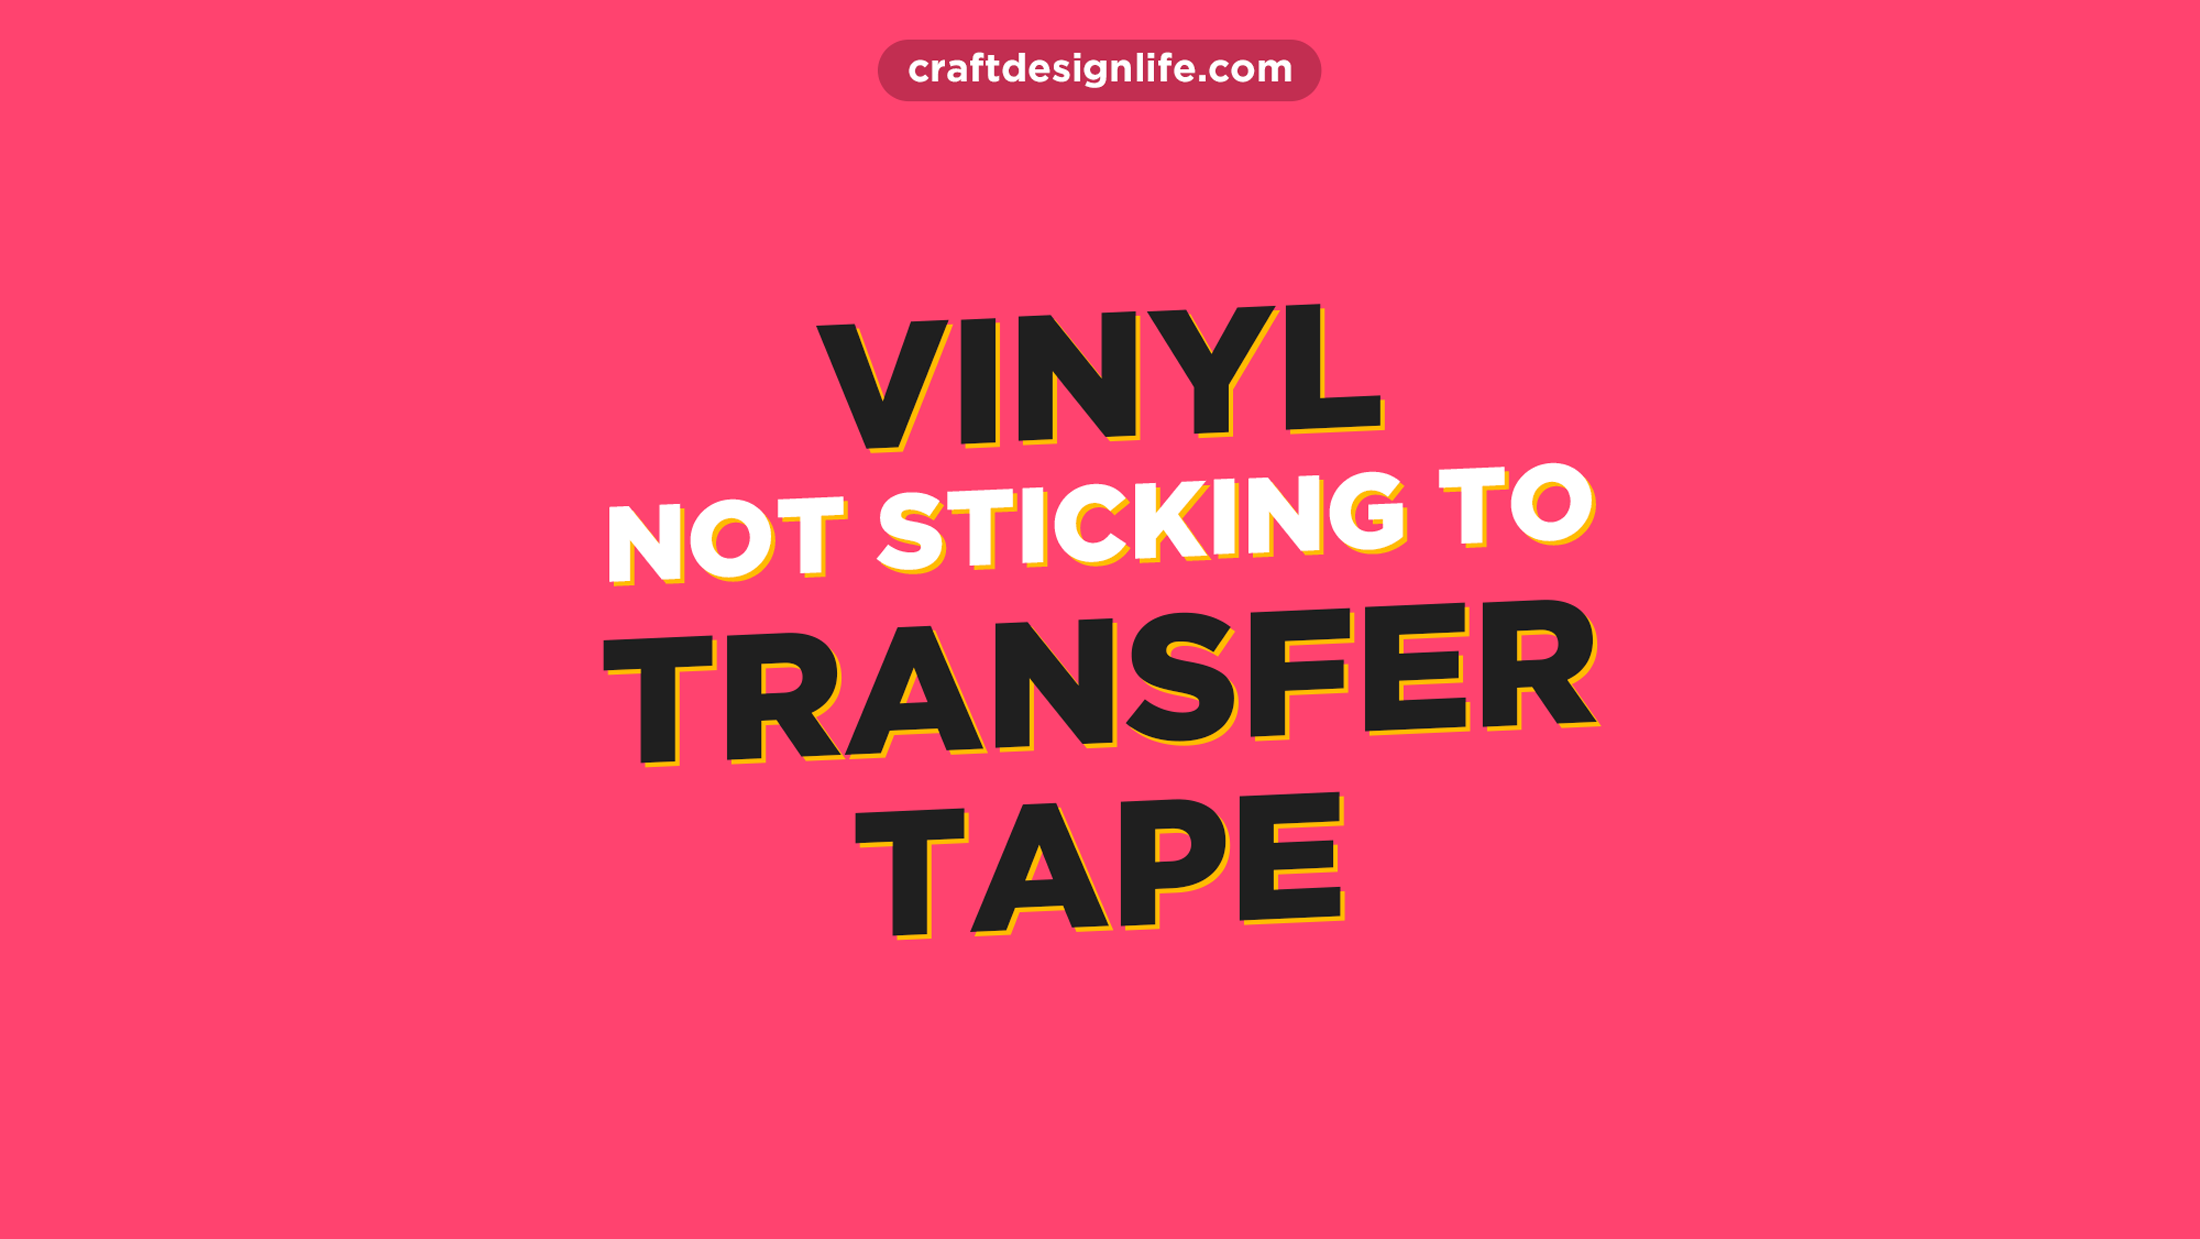 How To Fix Vinyl Not Sticking to Transfer Tape